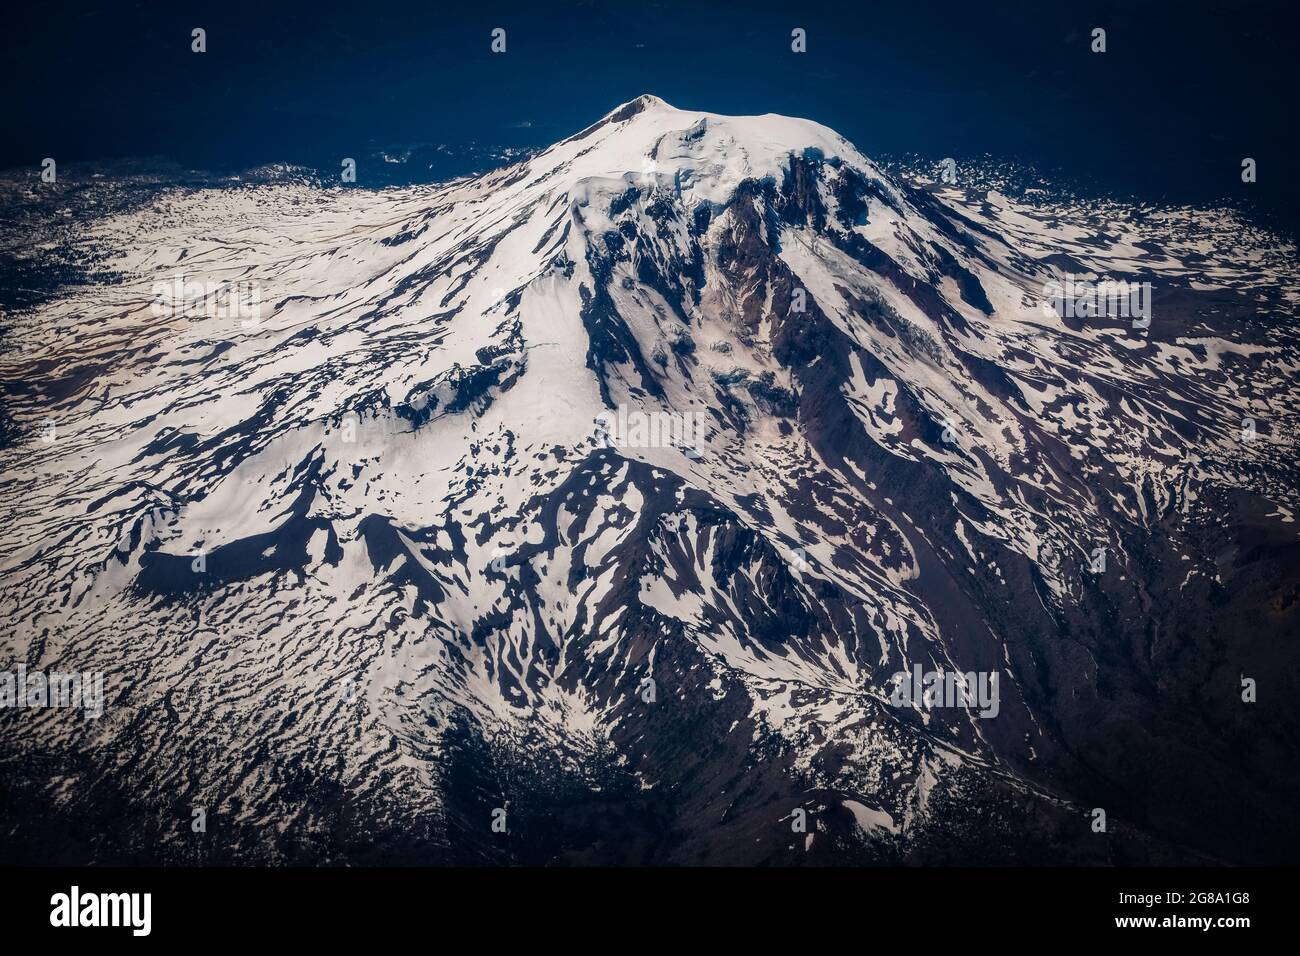 Mt. Adams, Cascade Mountains, Washington state, USA, Pacifico nord-ovest. Foto Stock